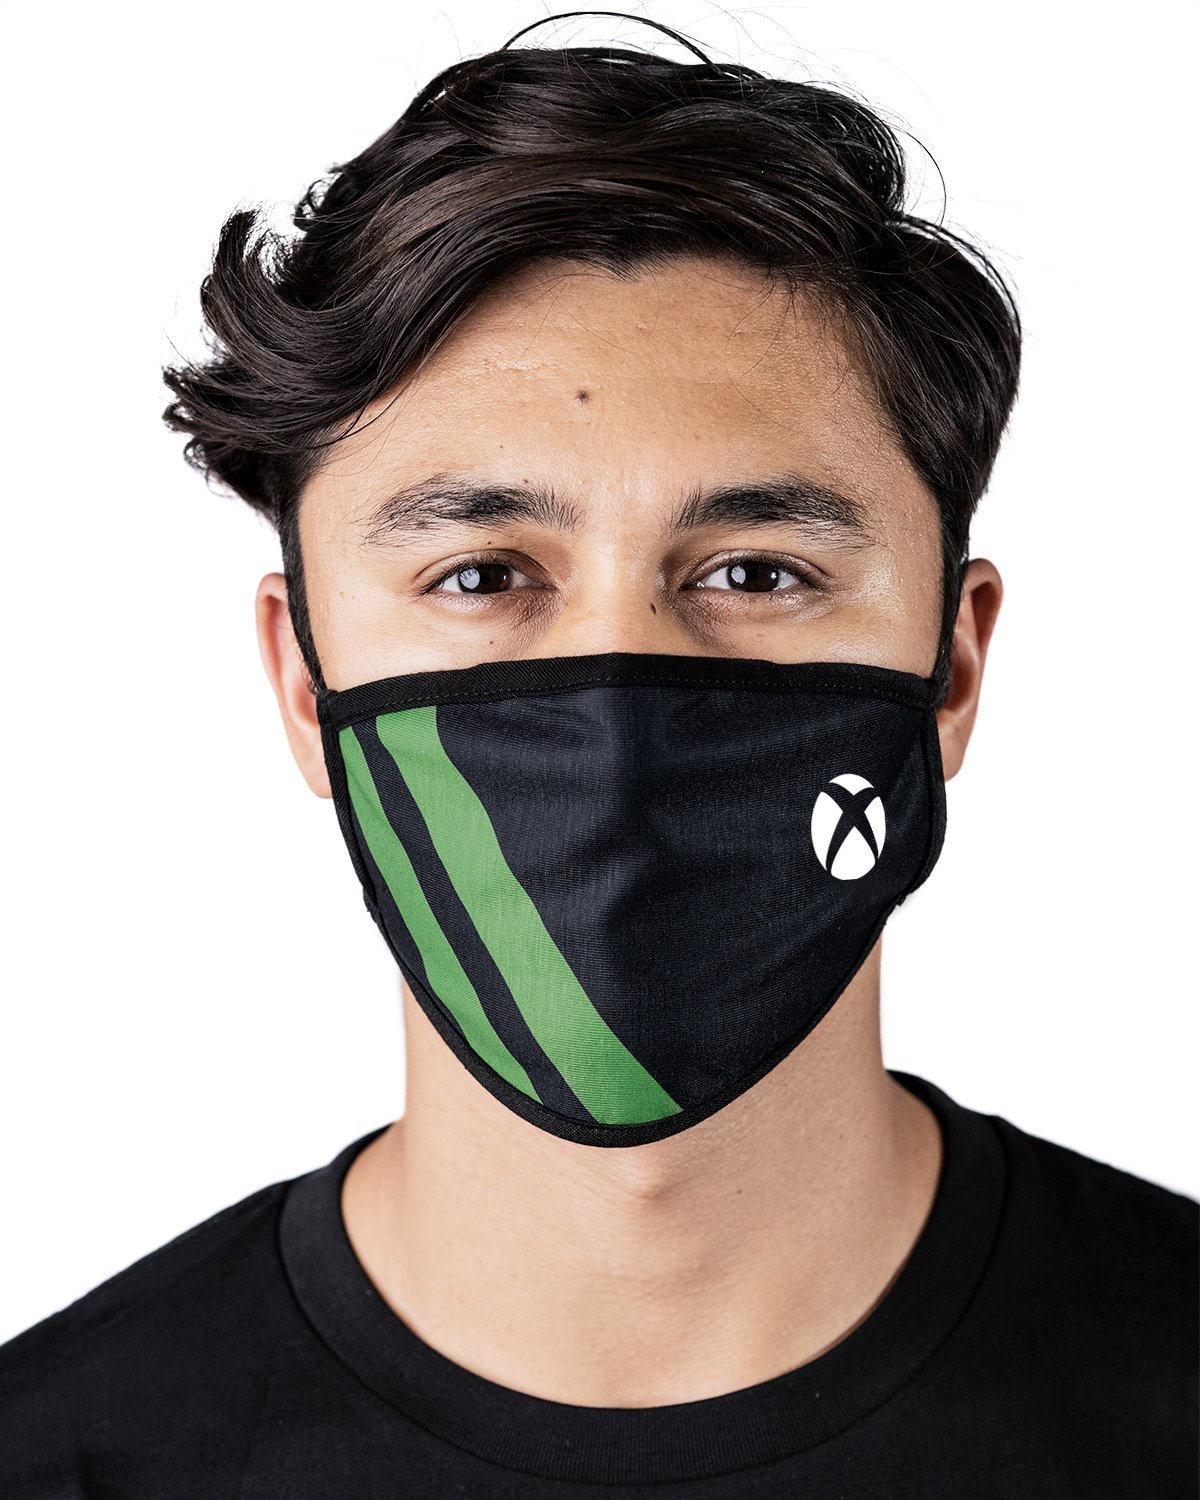 Xbox partners with Meta Threads to sell masks benefiting frontline ...